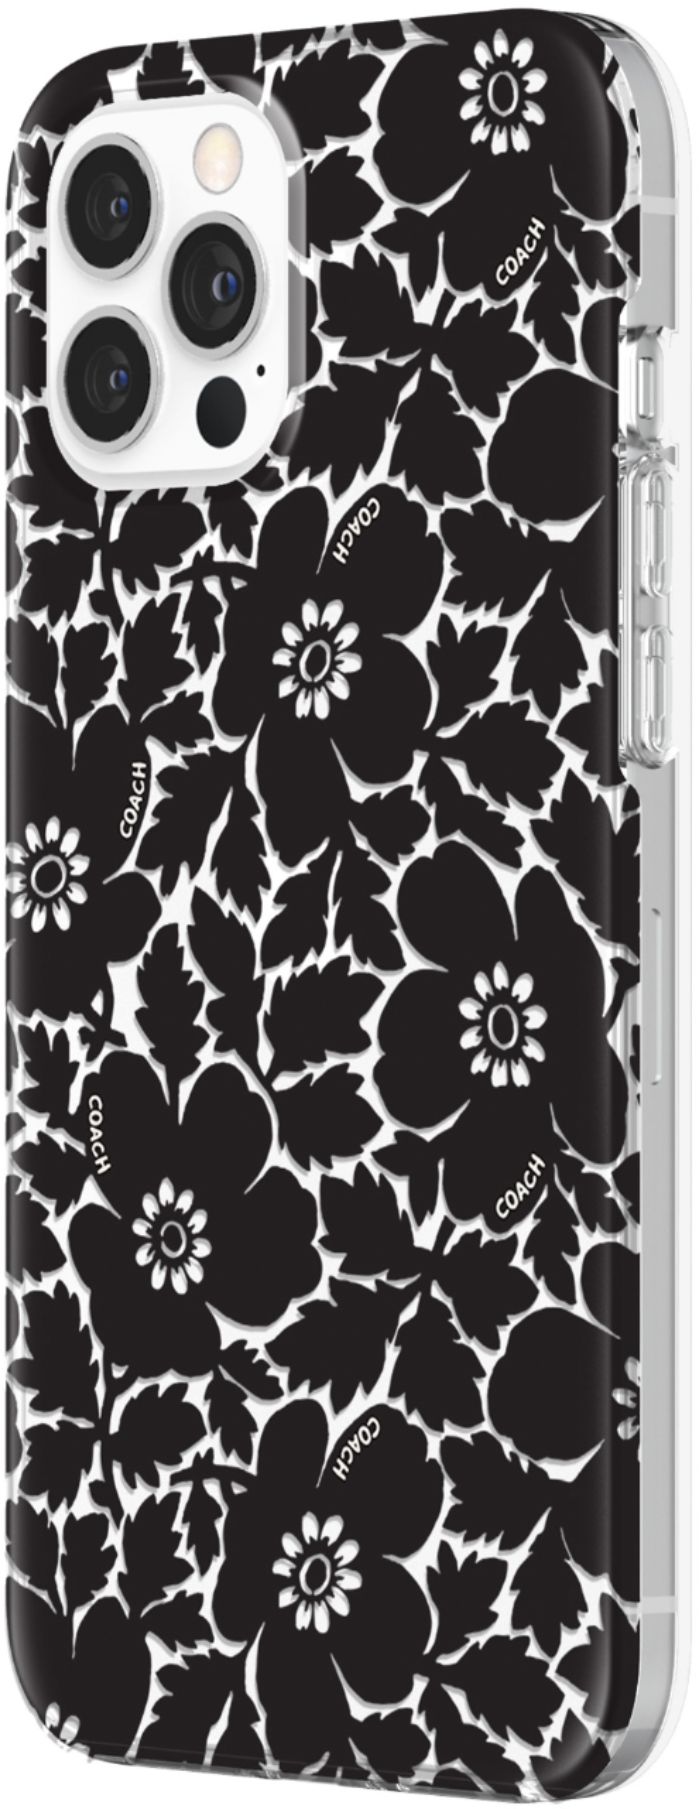 Best Buy: Coach Protective Case for iPhone 12 Pro Max CIPH-055-BFBLK